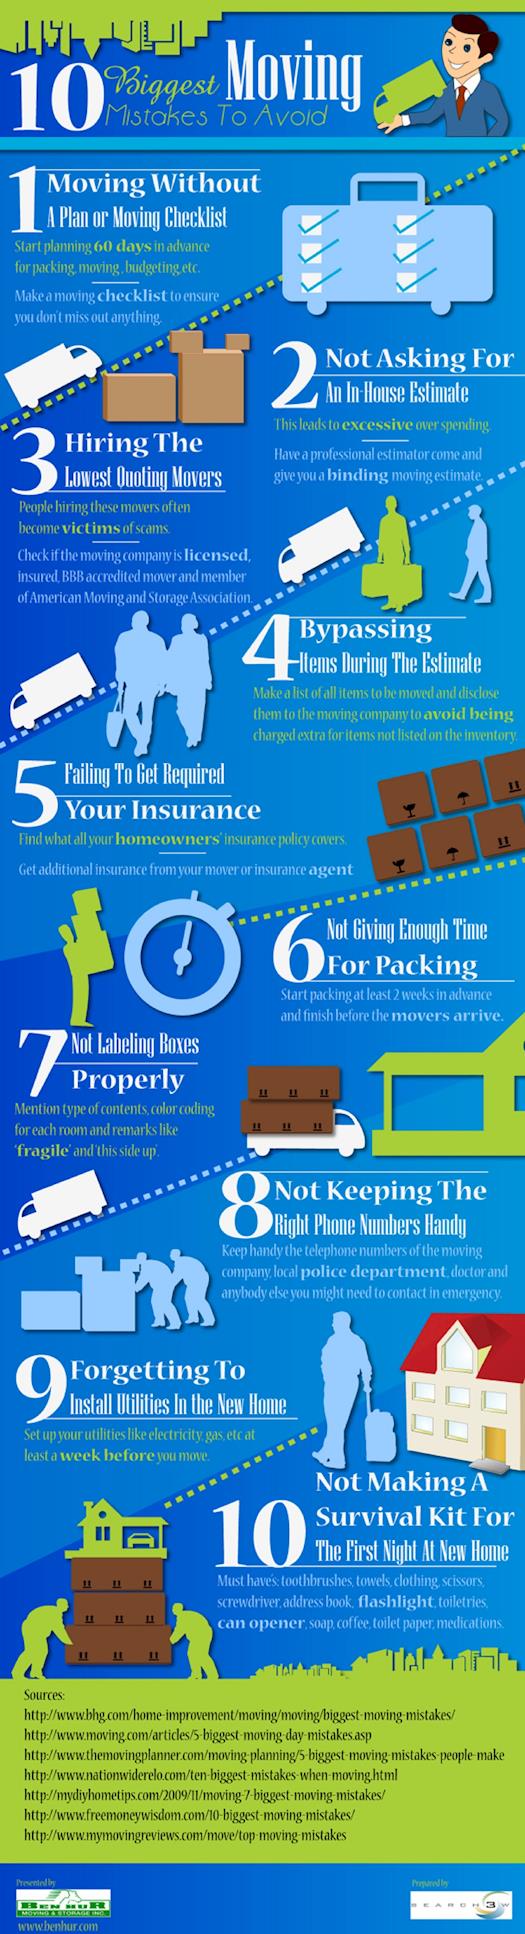 10 Biggest Moving Mistakes To Avoid